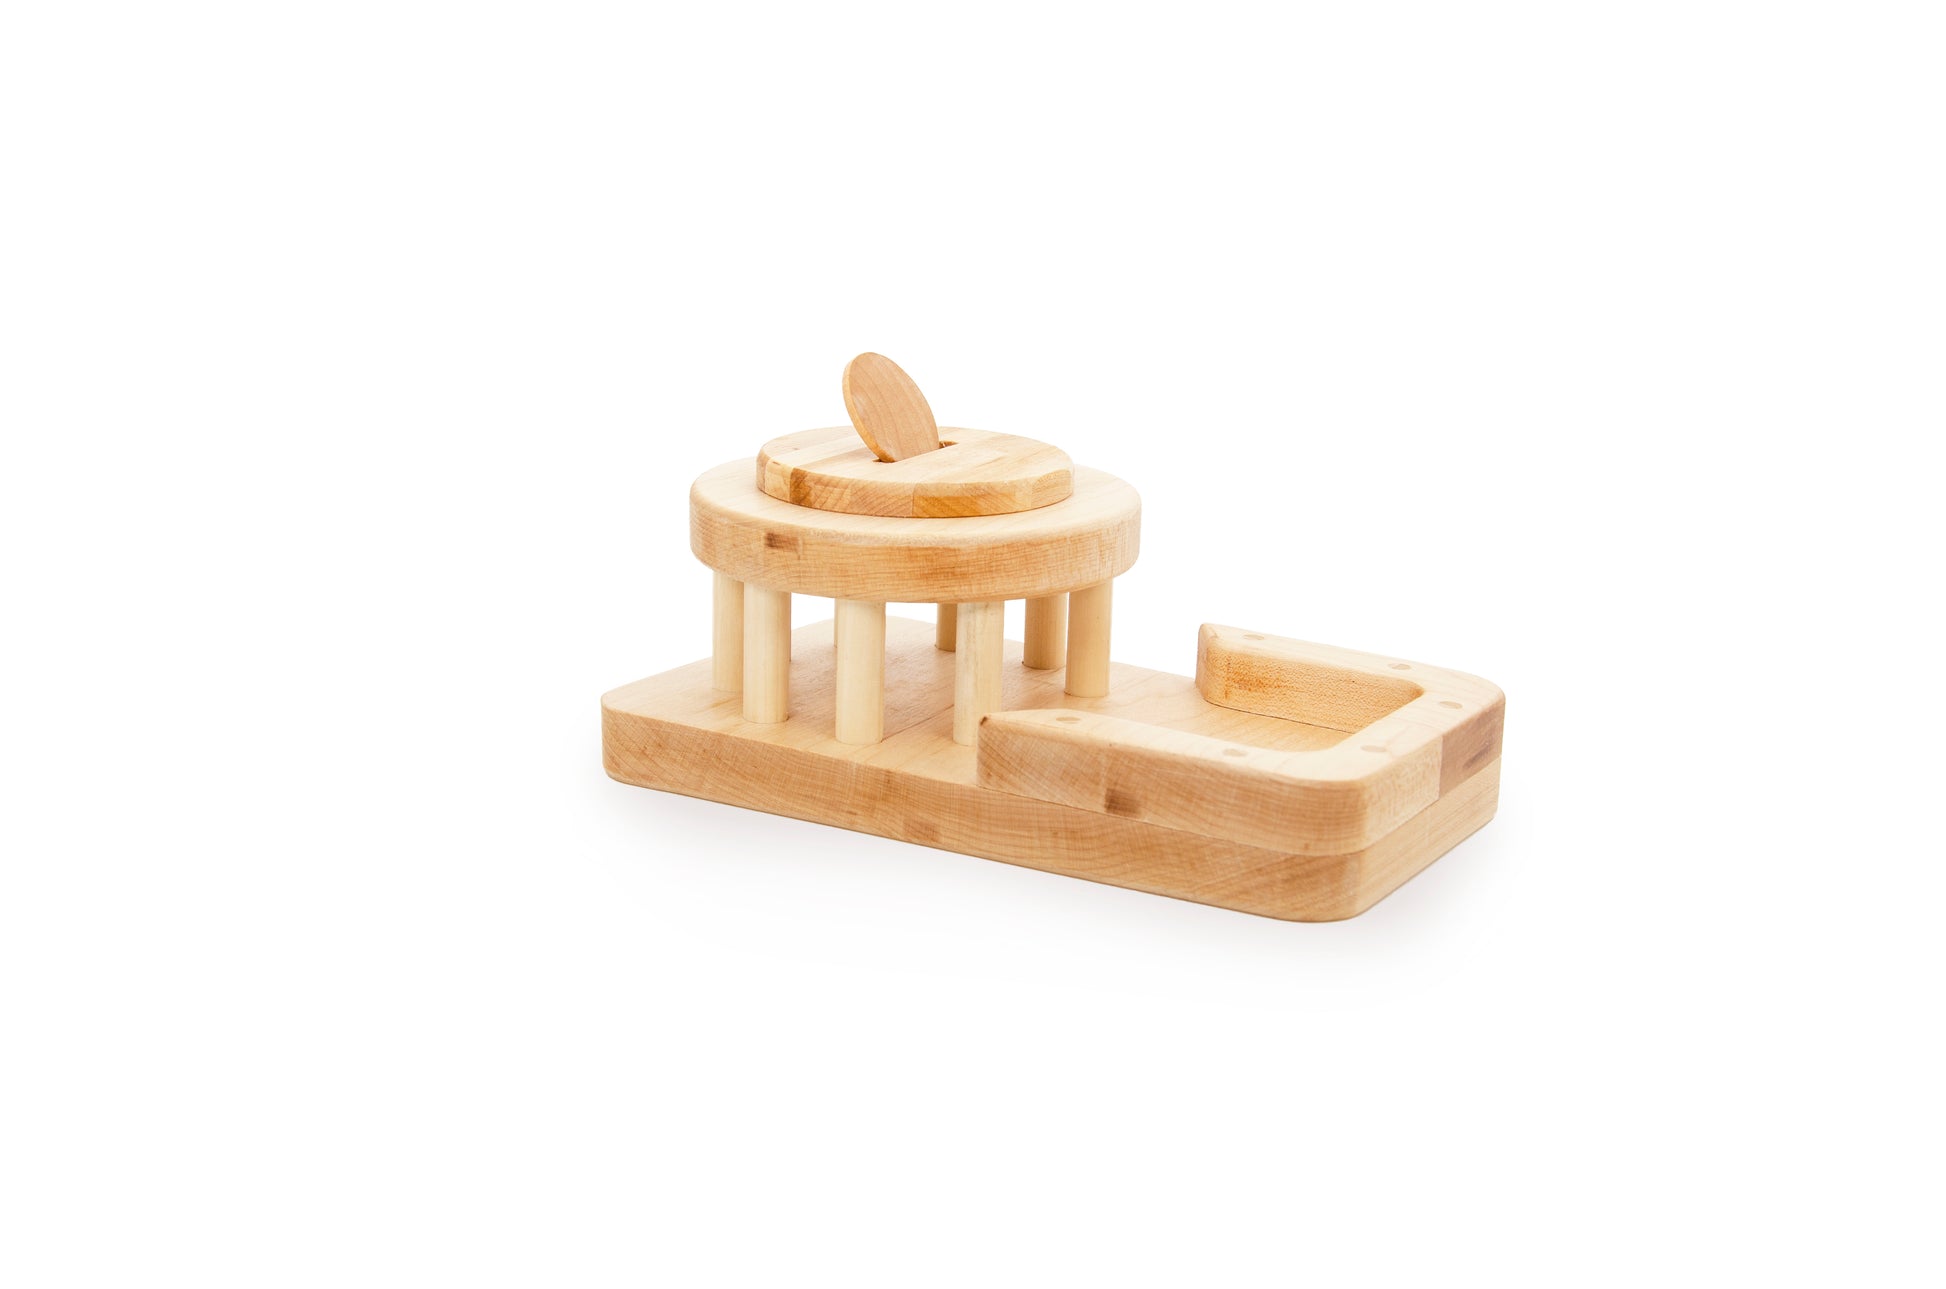 Montessori Permanence Box - A wooden box with a sliding lid and a cutout hole, designed to introduce the concept of object permanence to children in Montessori education. Encourages fine motor skills, problem-solving, and cognitive development